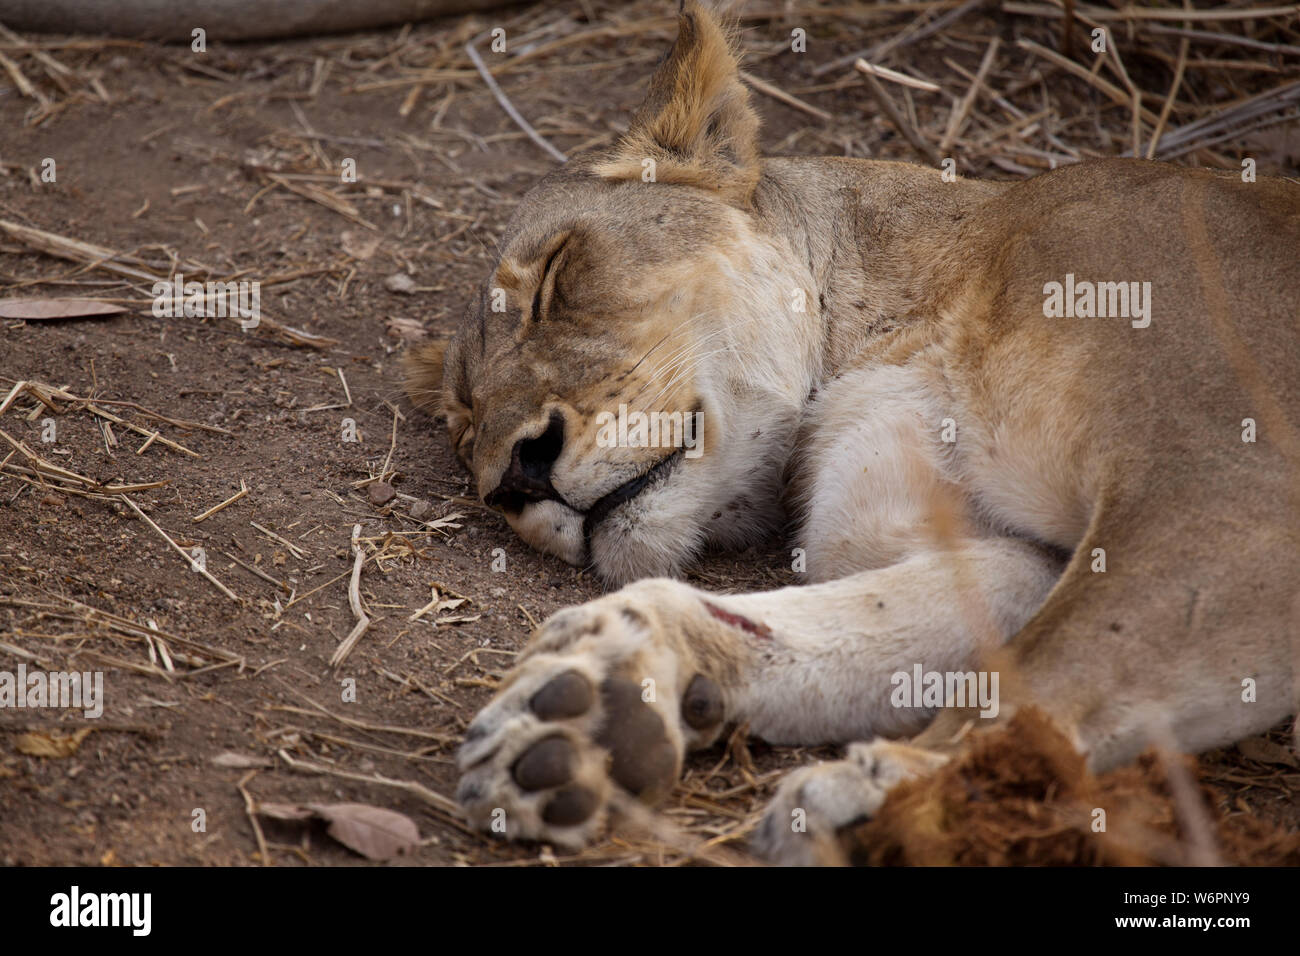 Lioness sleeping in Ruaha National Park. A recent wound can be seen on her right fore leg. Stock Photo